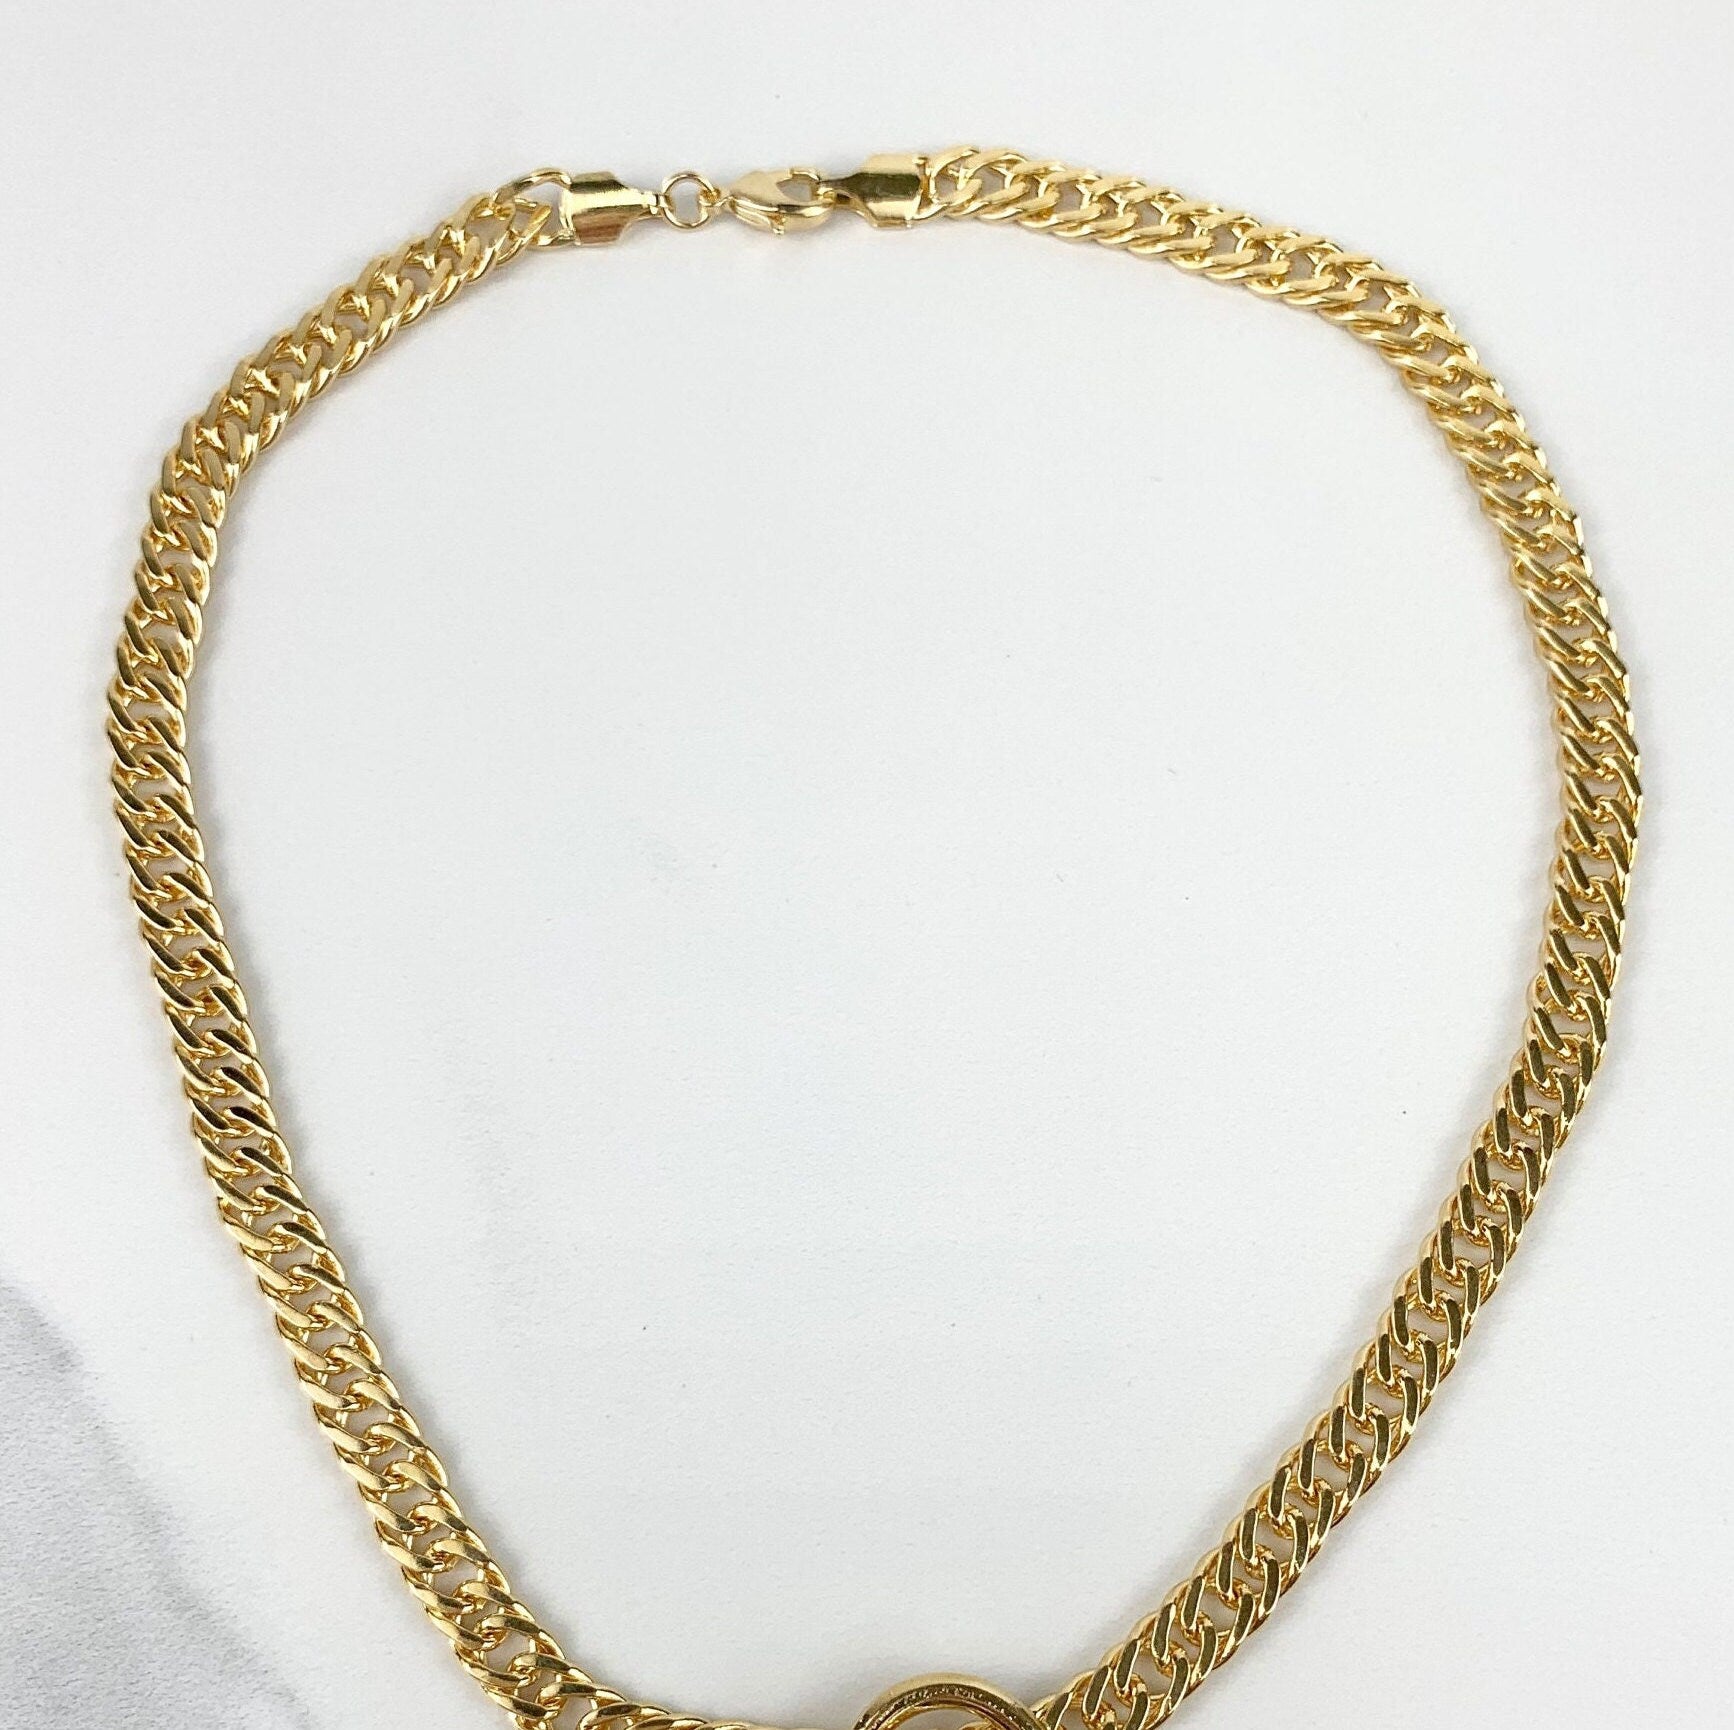 18k Gold Filled Cub Link Chain Pave Spiral Necklace Wholesale Jewelry Supplies